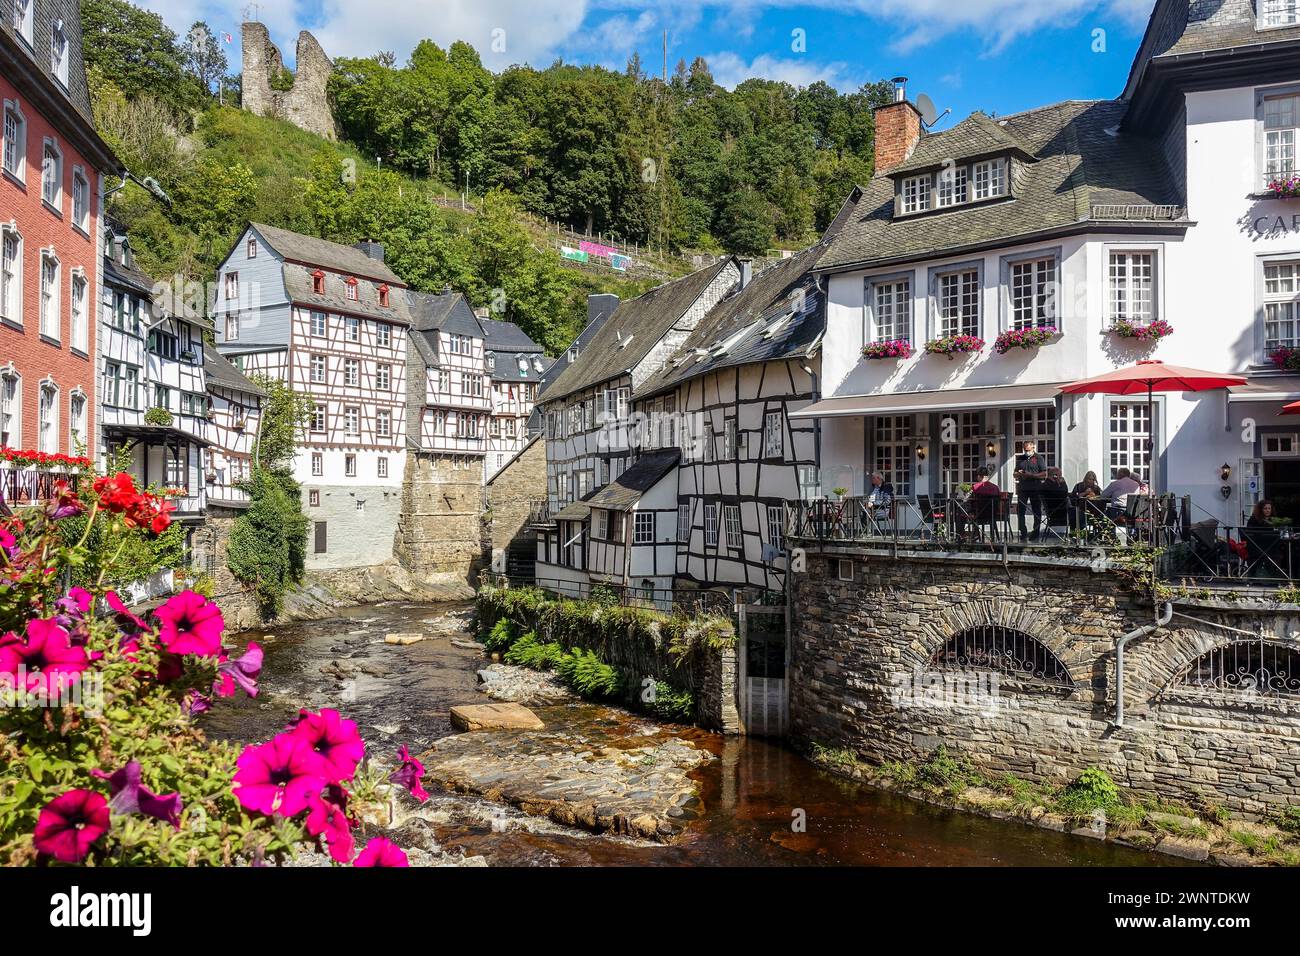 Quaint European village (Monschau, Germany) with half-timbered houses and a flower-lined bridge over a creek, with green hills in the background Stock Photo